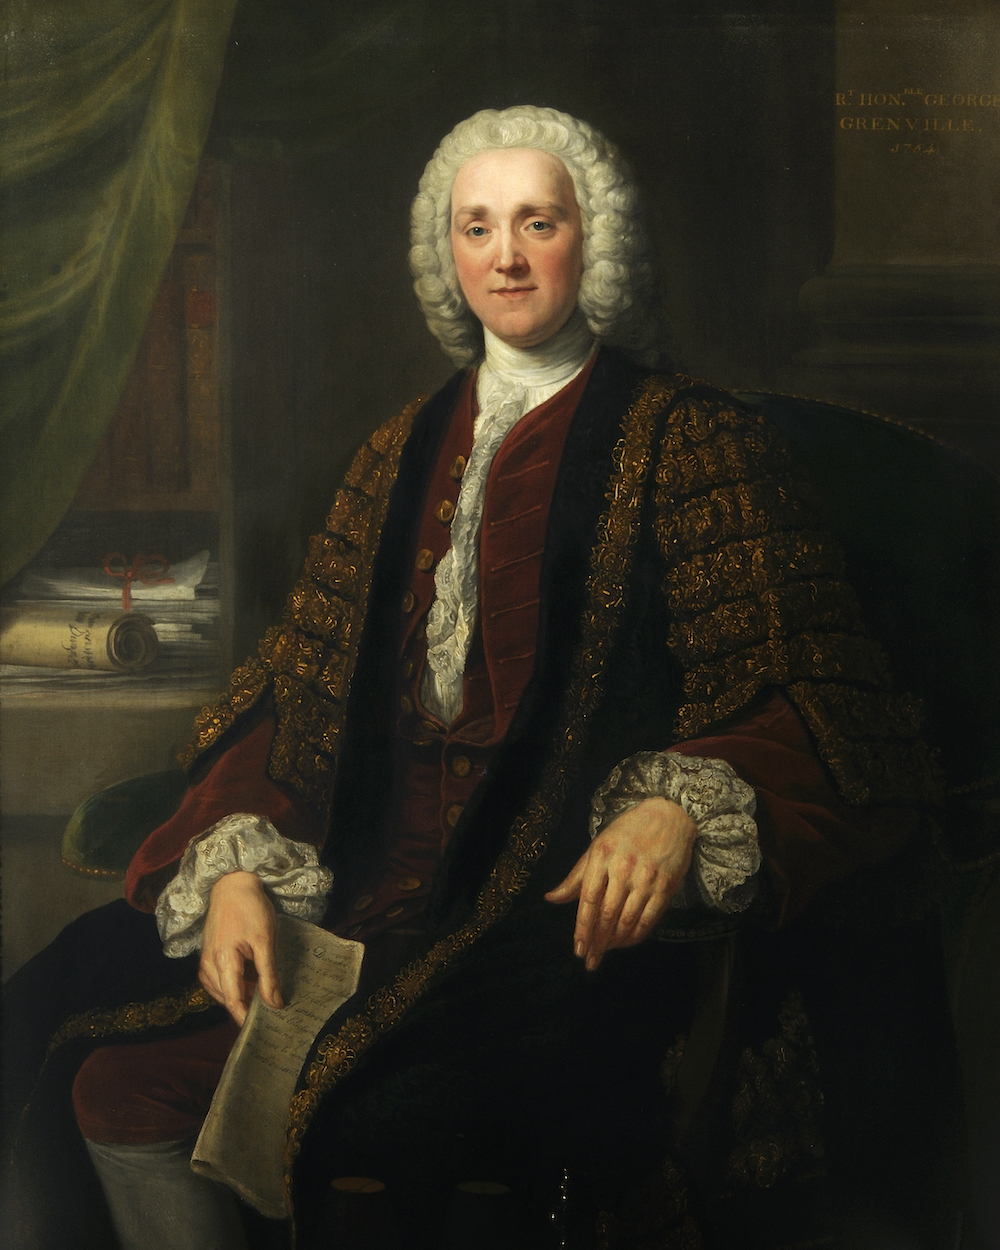 George Grenville (1707-1770) by William Hoare